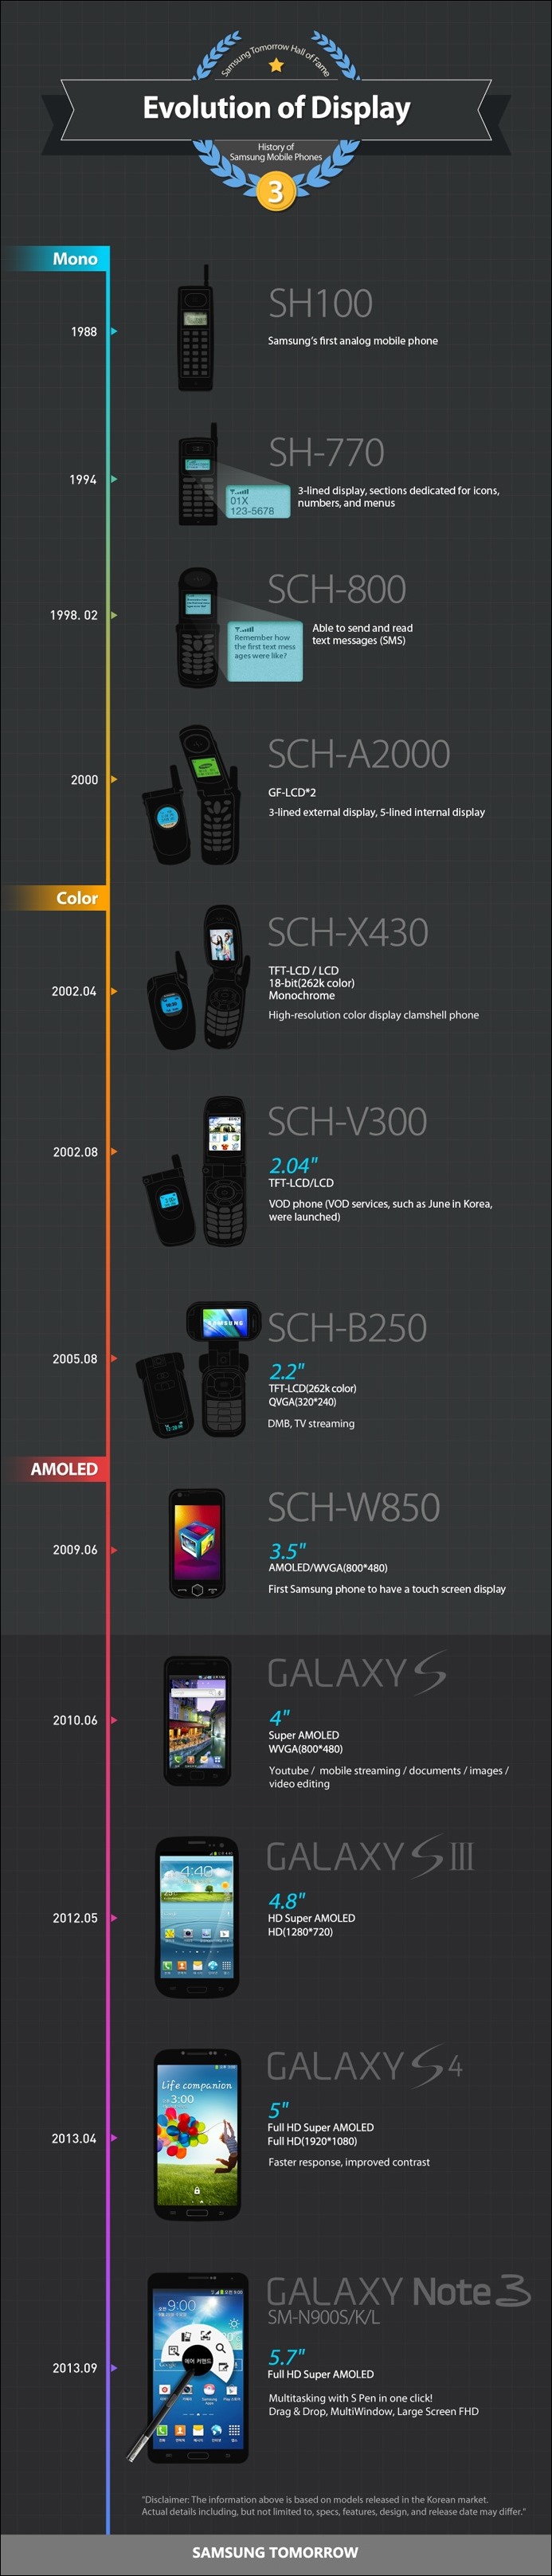 Infographic-History-of-Samsung-Mobile-Phones-Evolution-of-Display